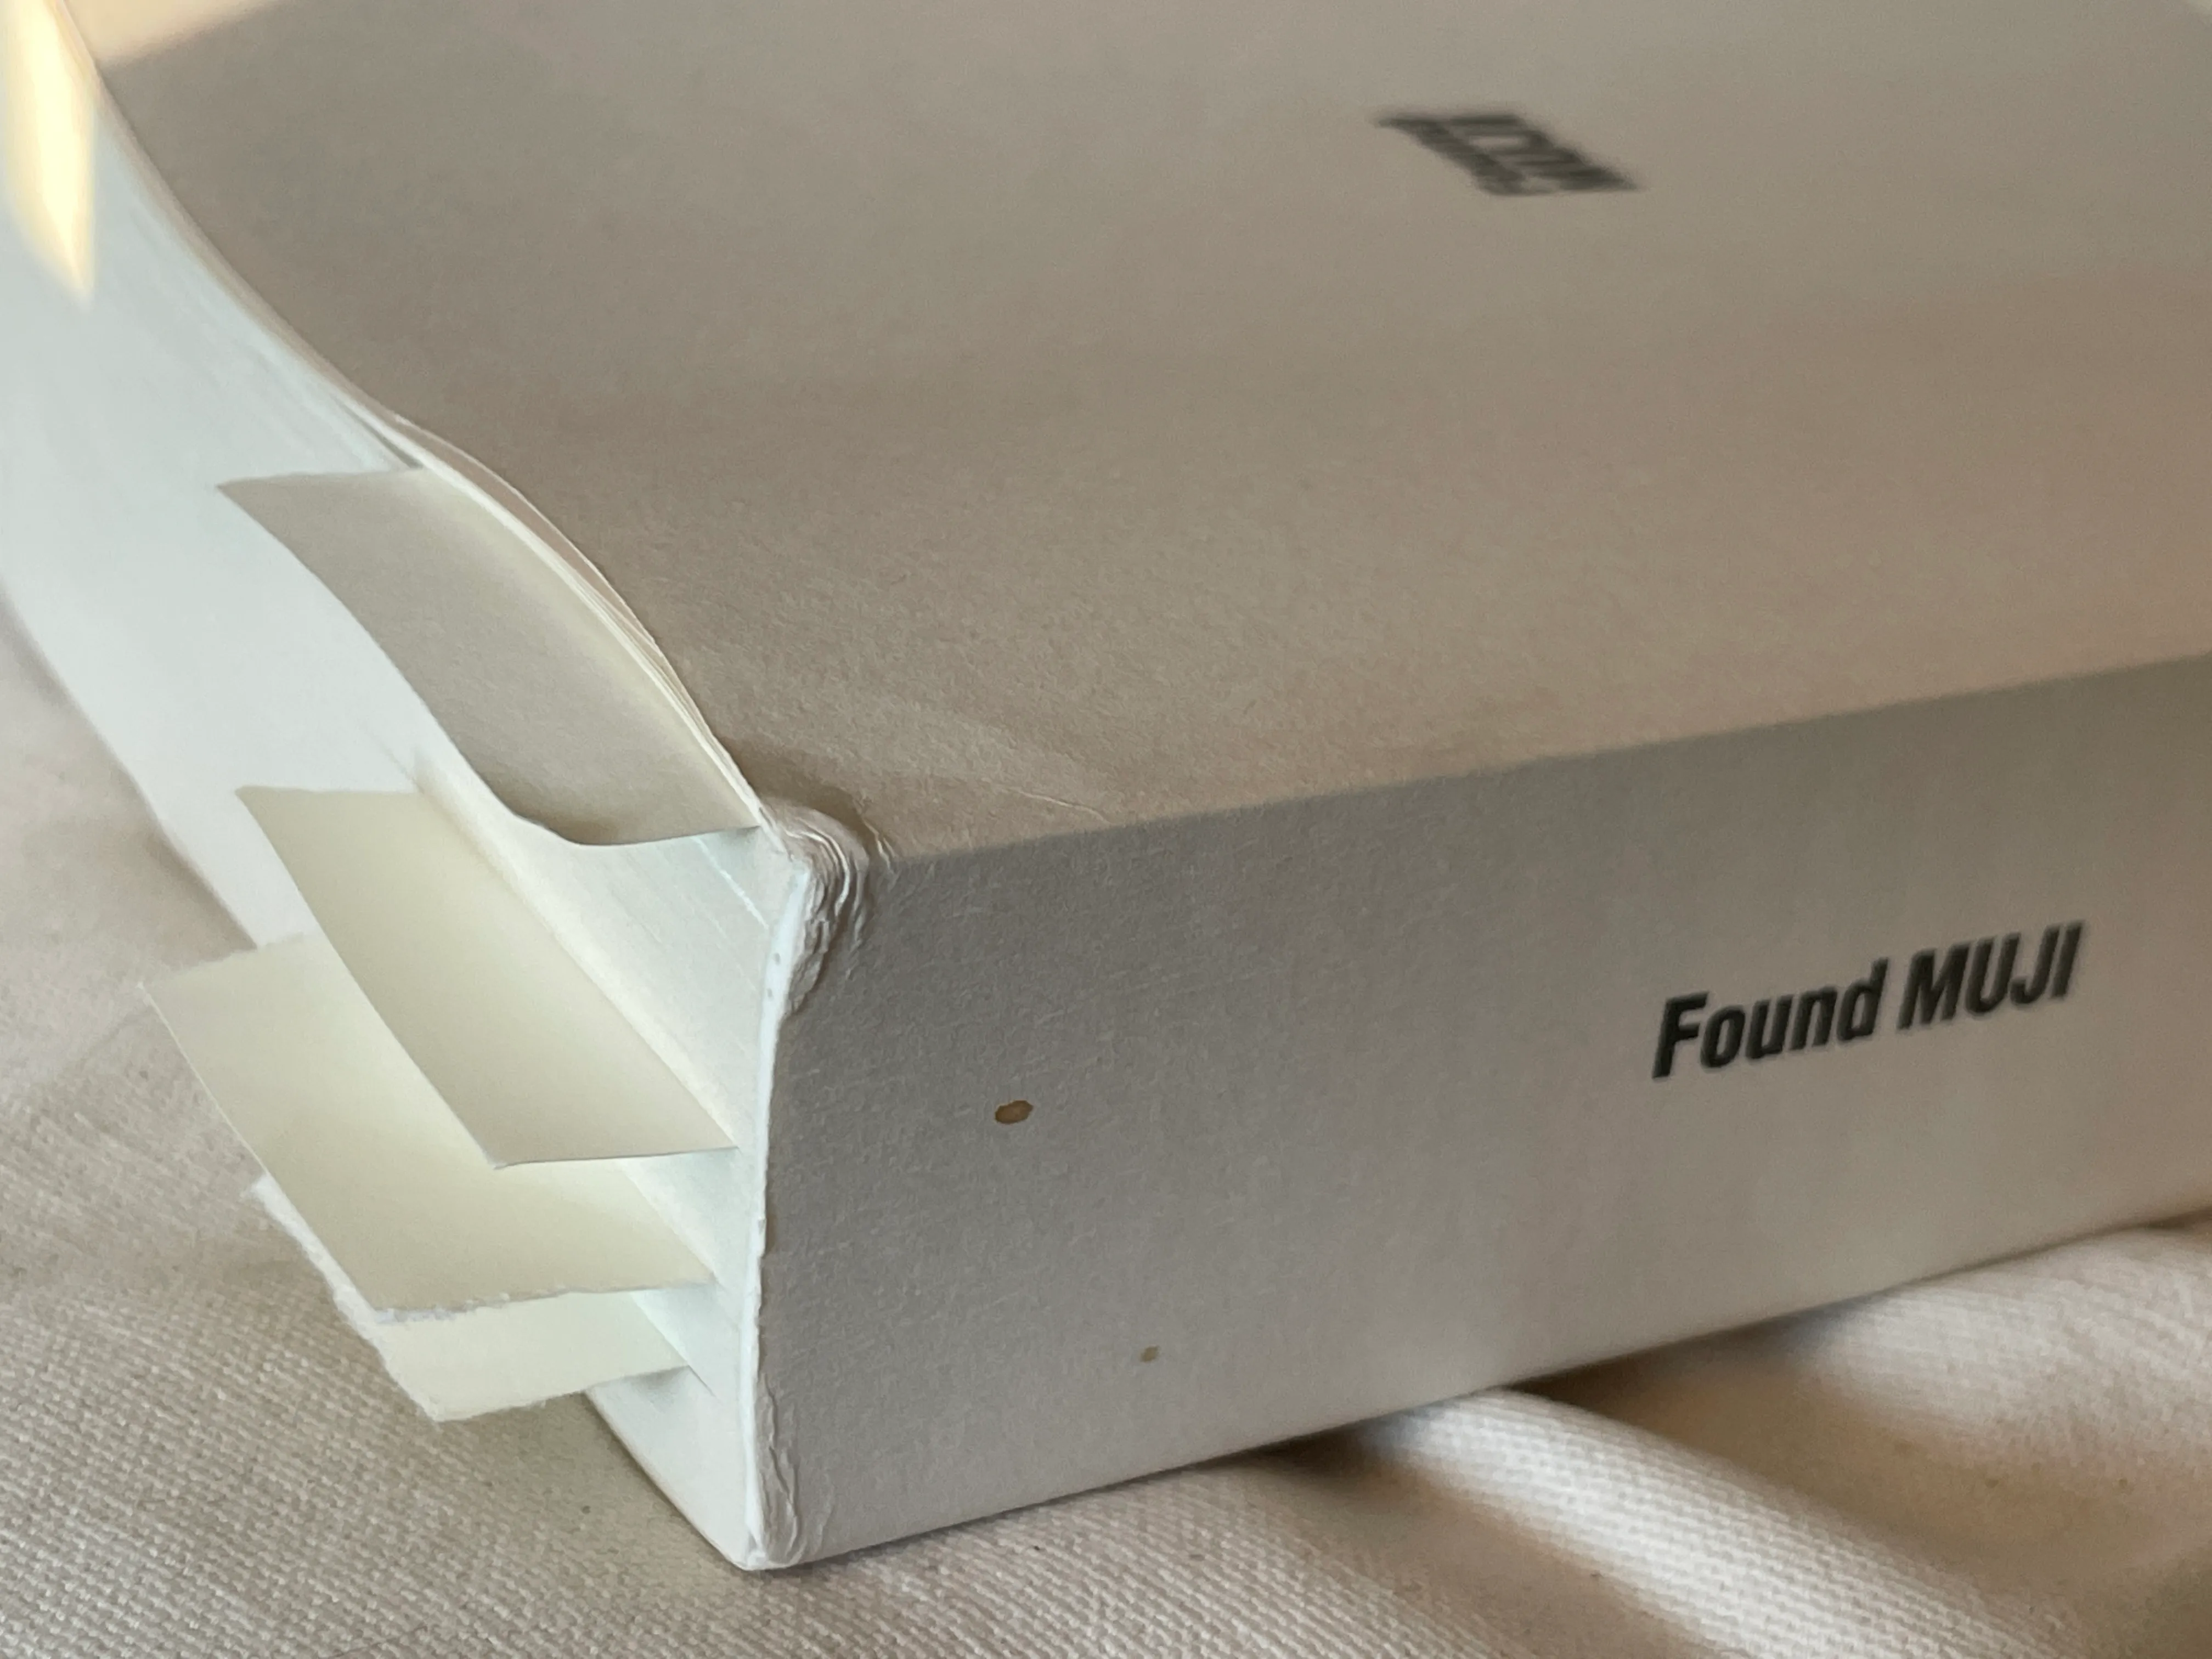 A photograph of the cover of Found Muji, with some bookmarks peeking out of the pages.